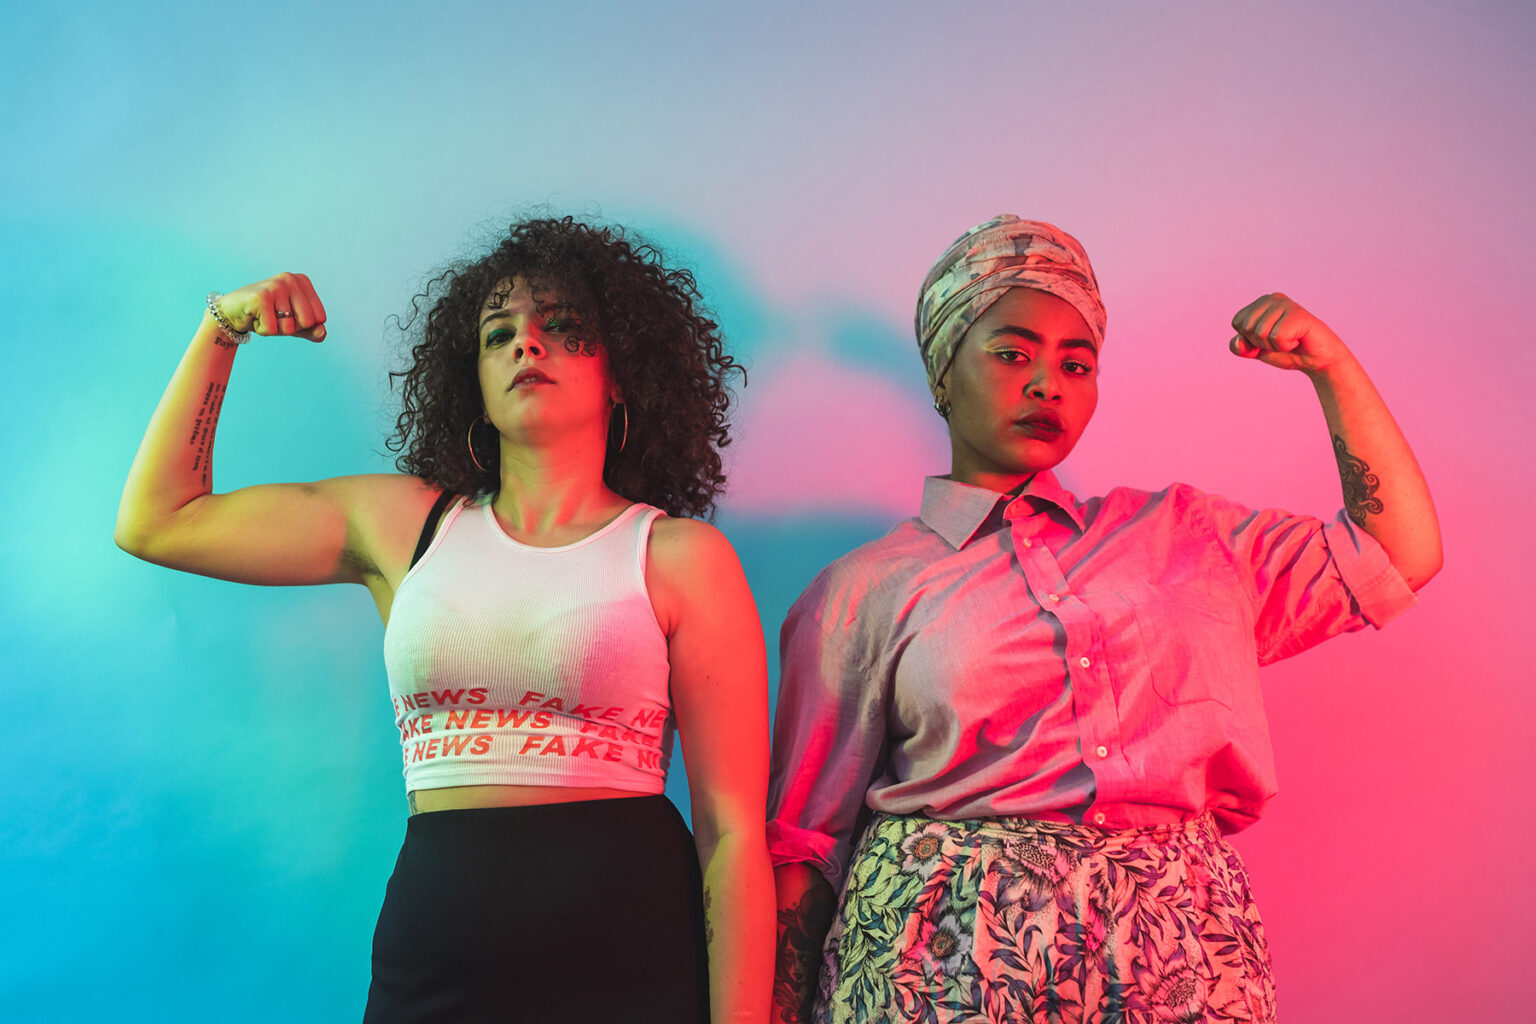 Two powerful-looking women flexing their muscles in the style of Rosie the Riveter on a blue and pink background.